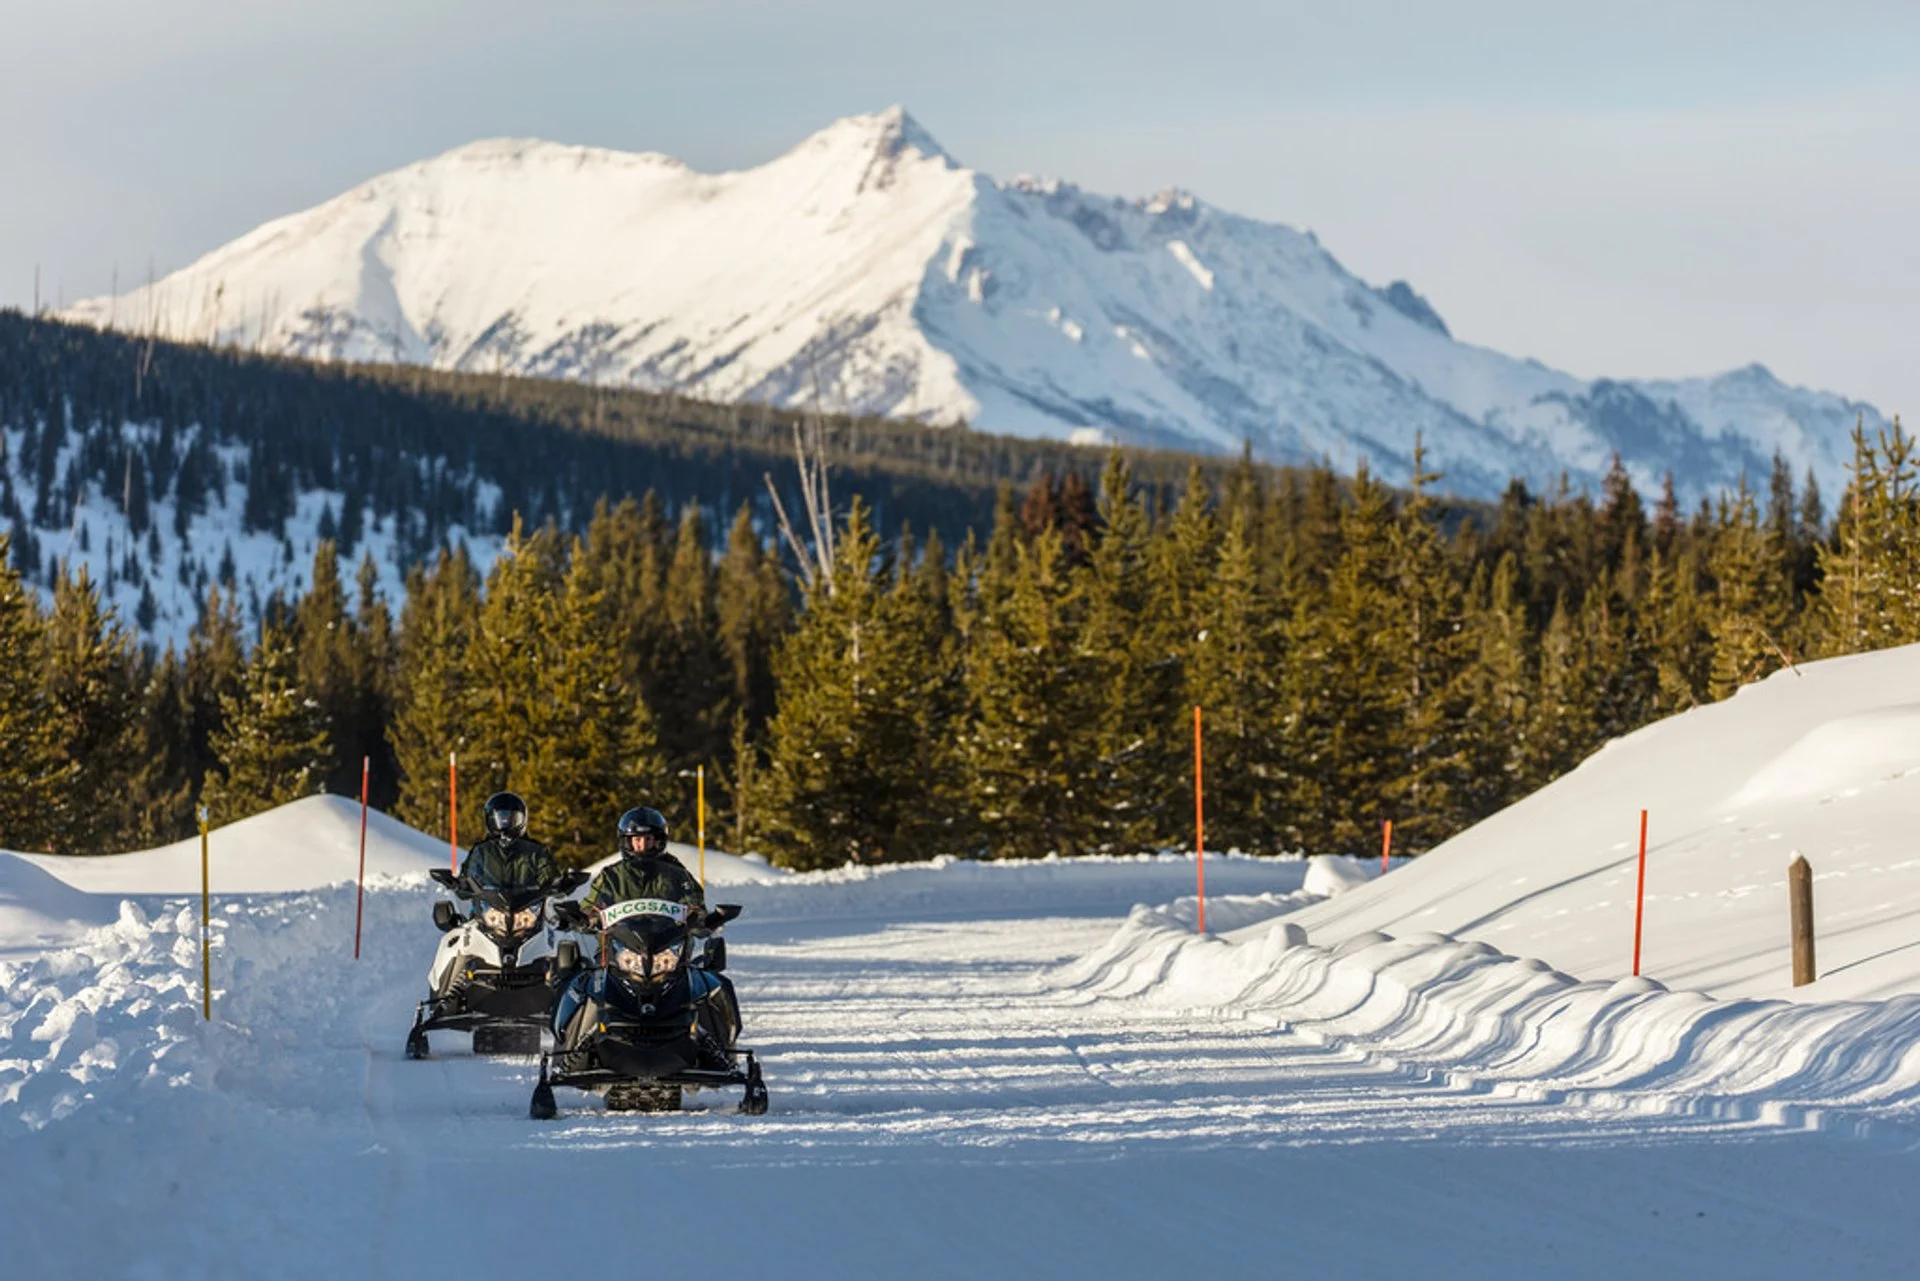 Snowmobiling In Yellowstone National Park - A Must Do Winter Adventure